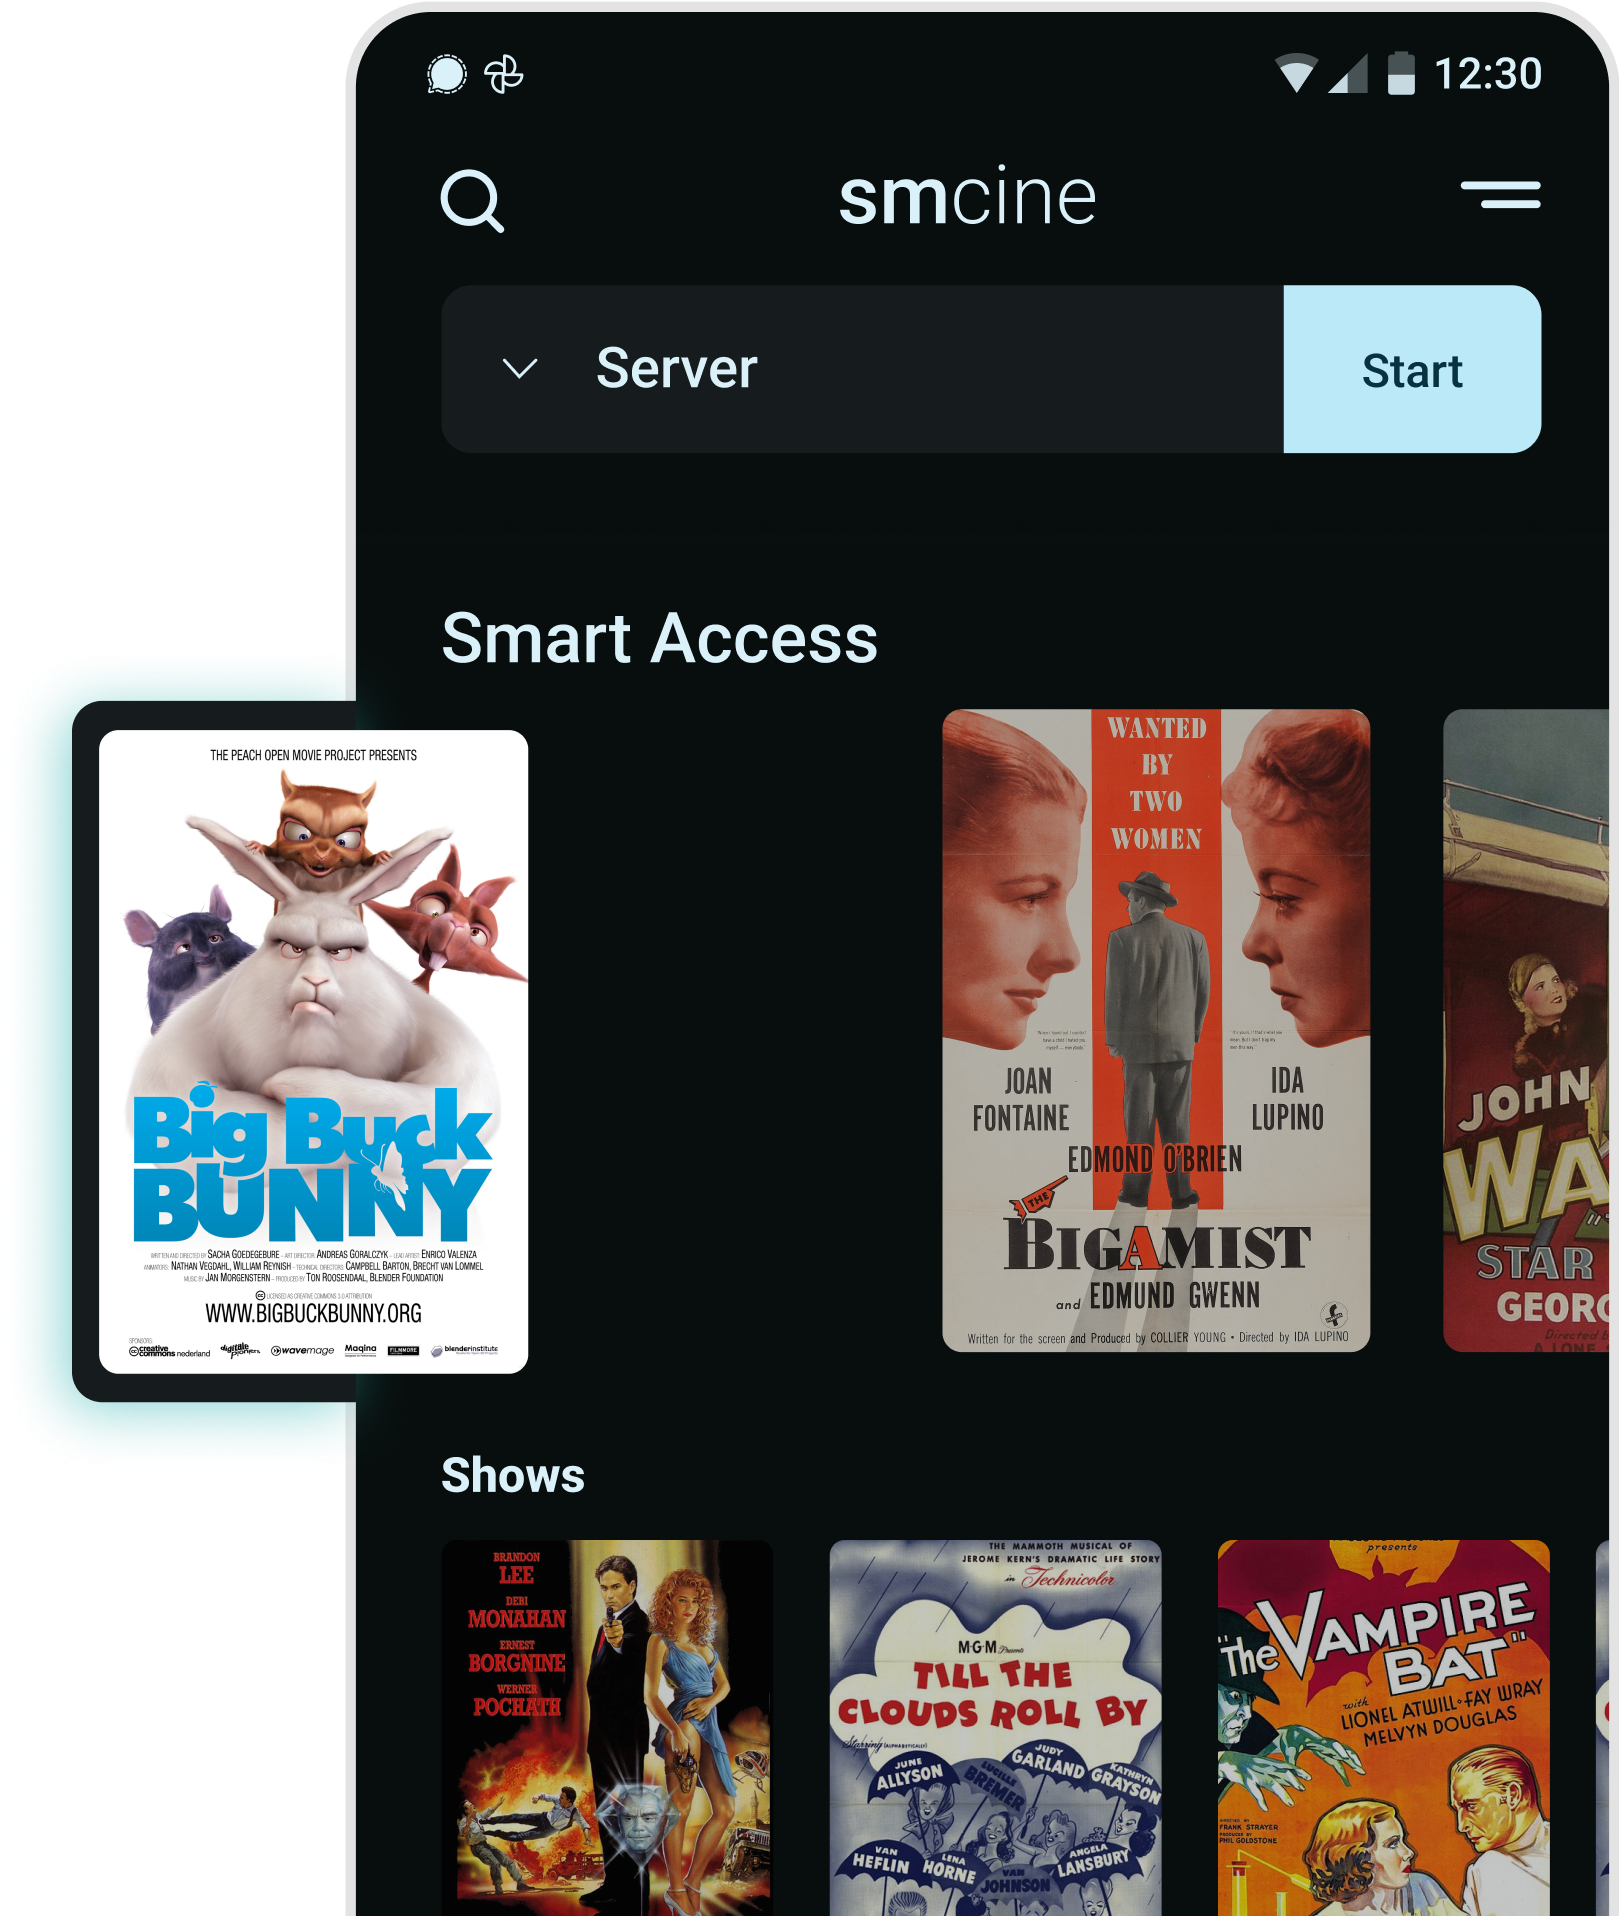 smcine mobile application screenshot showcasing the core feature of creating a network wide server to serve videos stored locally on the device